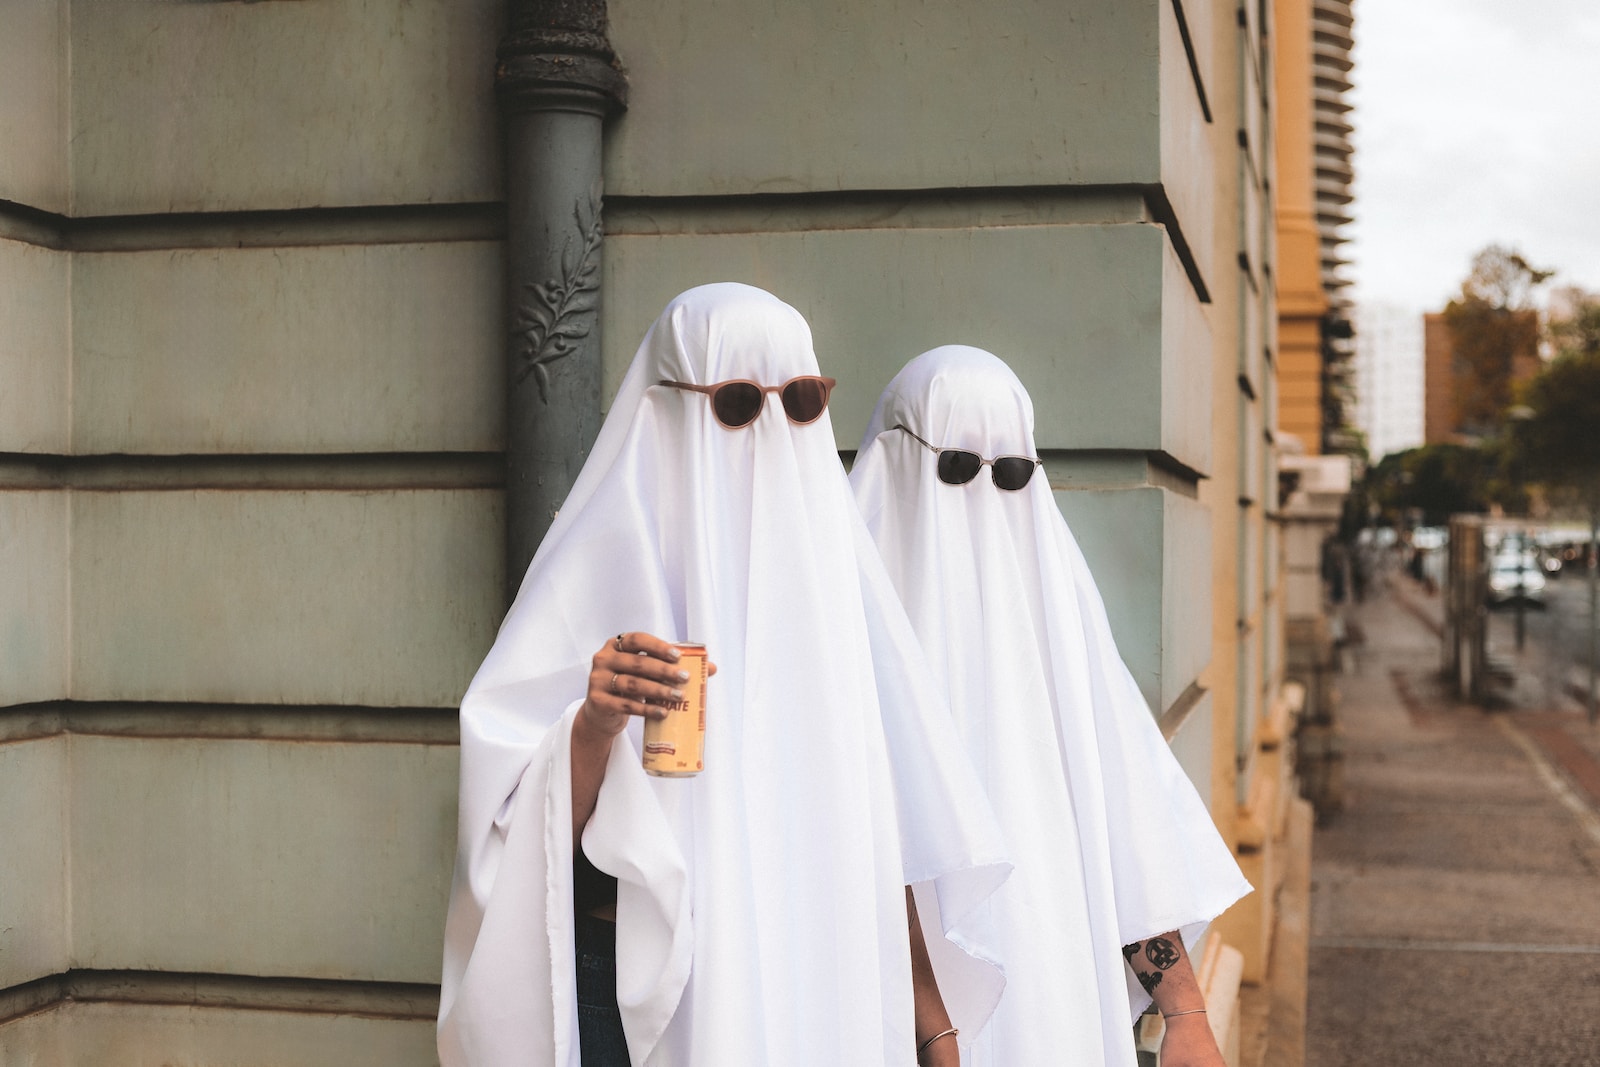 two people dressed in white standing next to each other